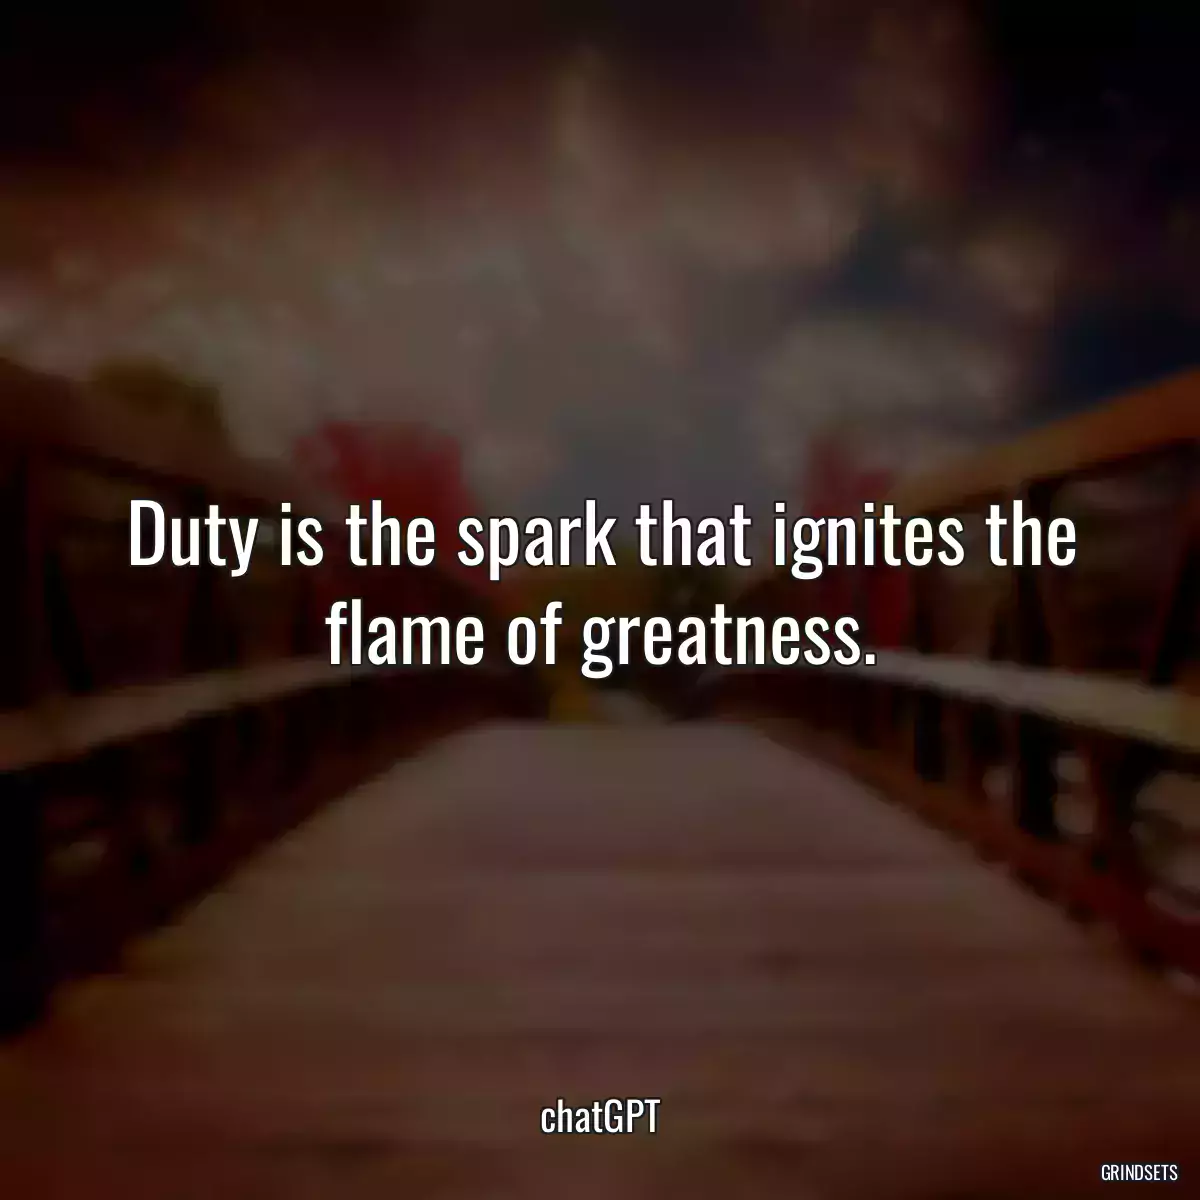 Duty is the spark that ignites the flame of greatness.